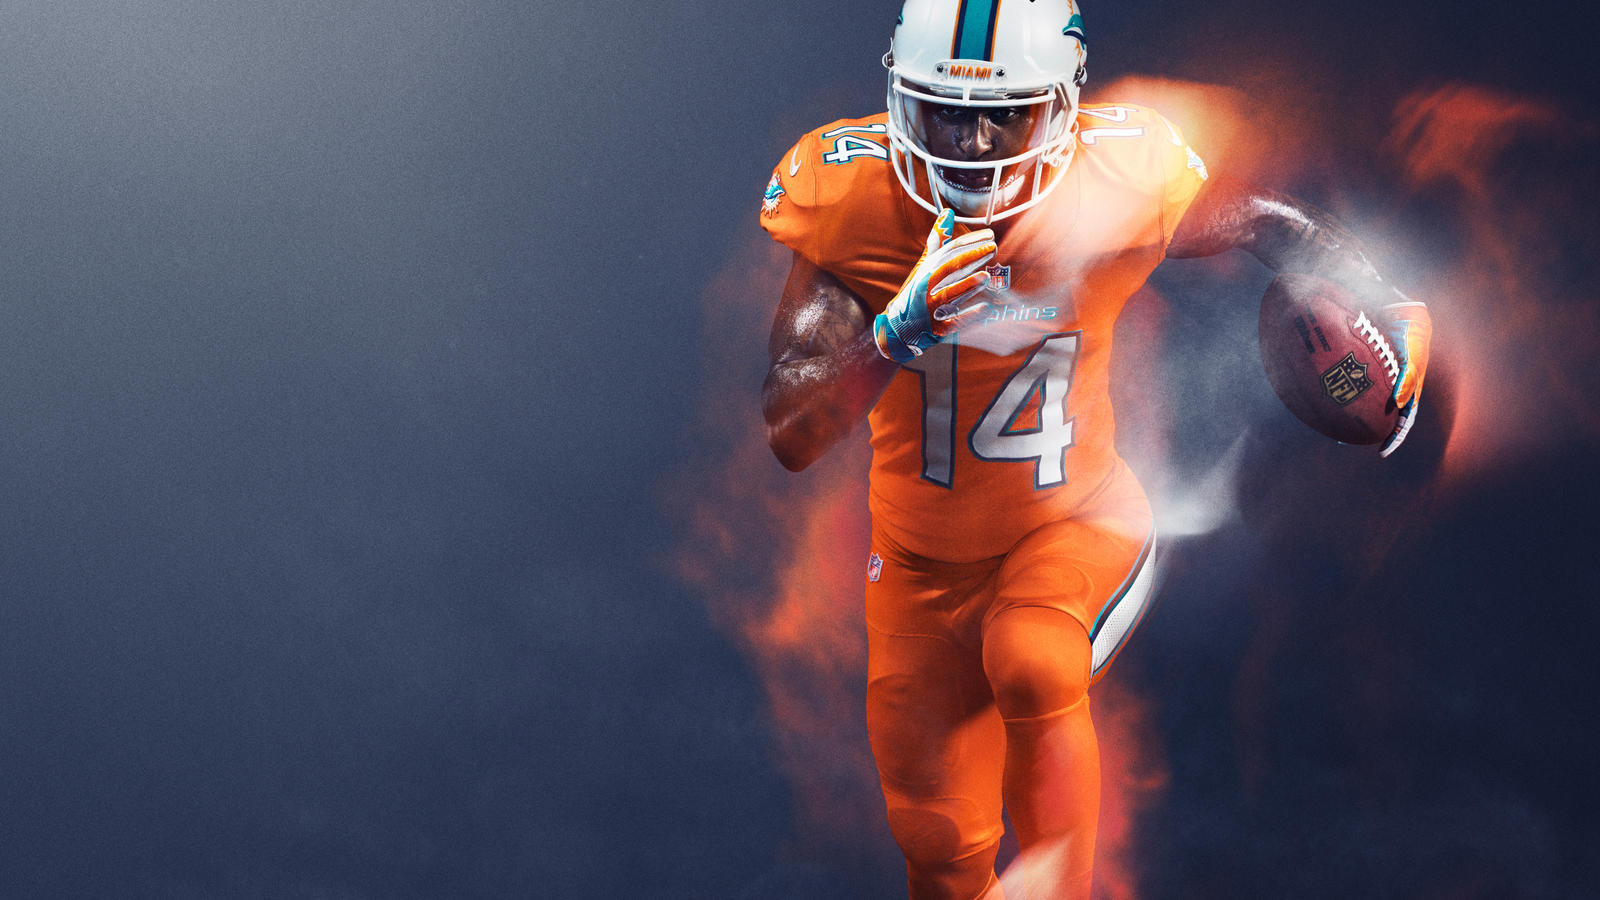 A Look At All 32 NFL Color Rush Uniforms  Nfl color rush uniforms, Color  rush nfl, Color rush